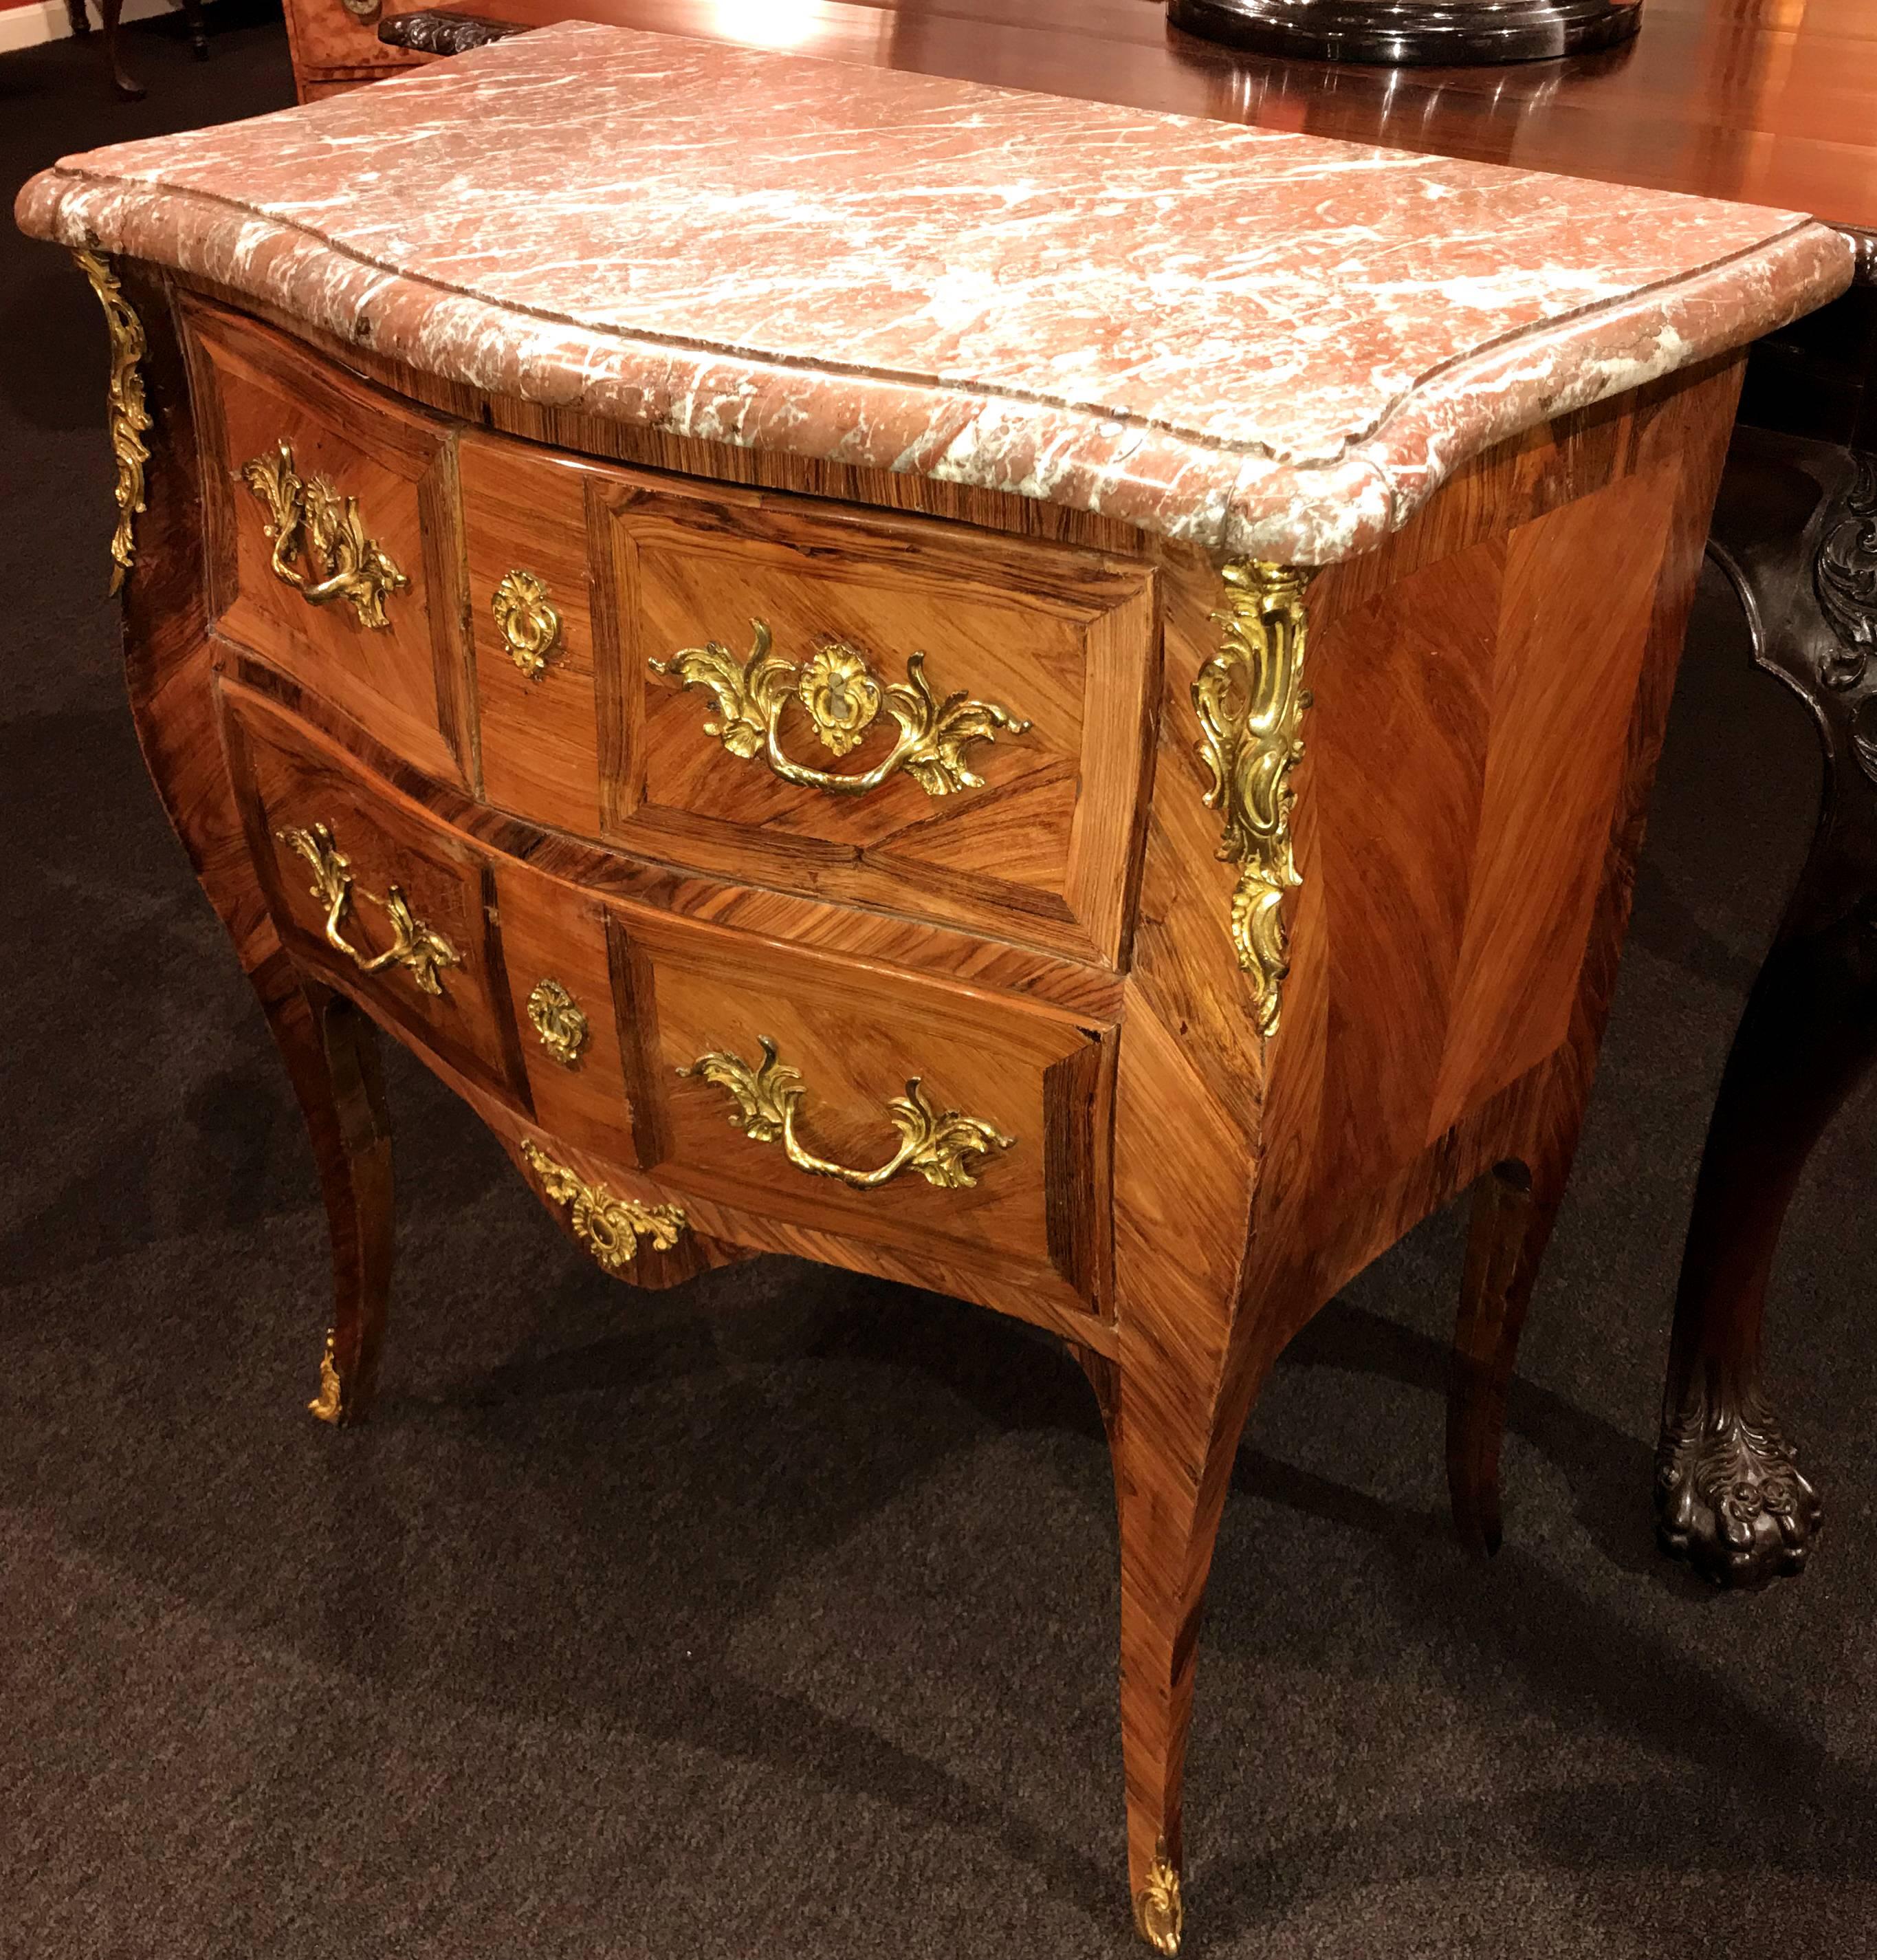 A fine diminutive Louis XV three-drawer commode with Breche d’Alep marble conforming top in shades of pink and grey with molded edge and notched corners, surmounting a case with two fitted drawers over a single long drawer, all with rosewood and